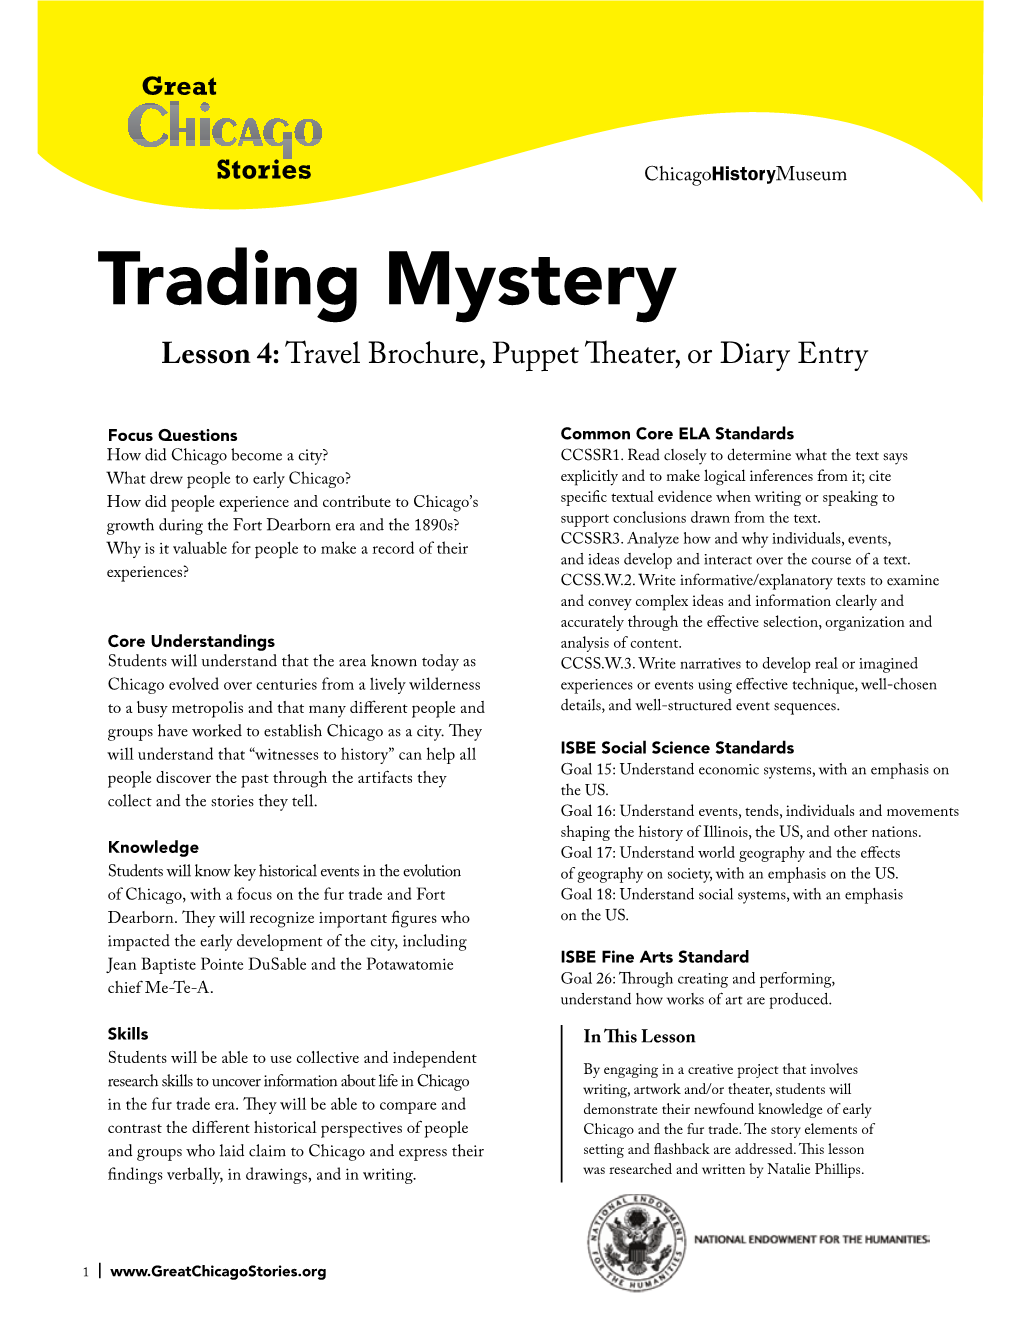 Trading Mysterymystery Lesson 4: Travel Brochure, Puppet Theater, Or Diary Entry Lesson 4: Travel Brochure, Puppet Theater, Or Diary Entry